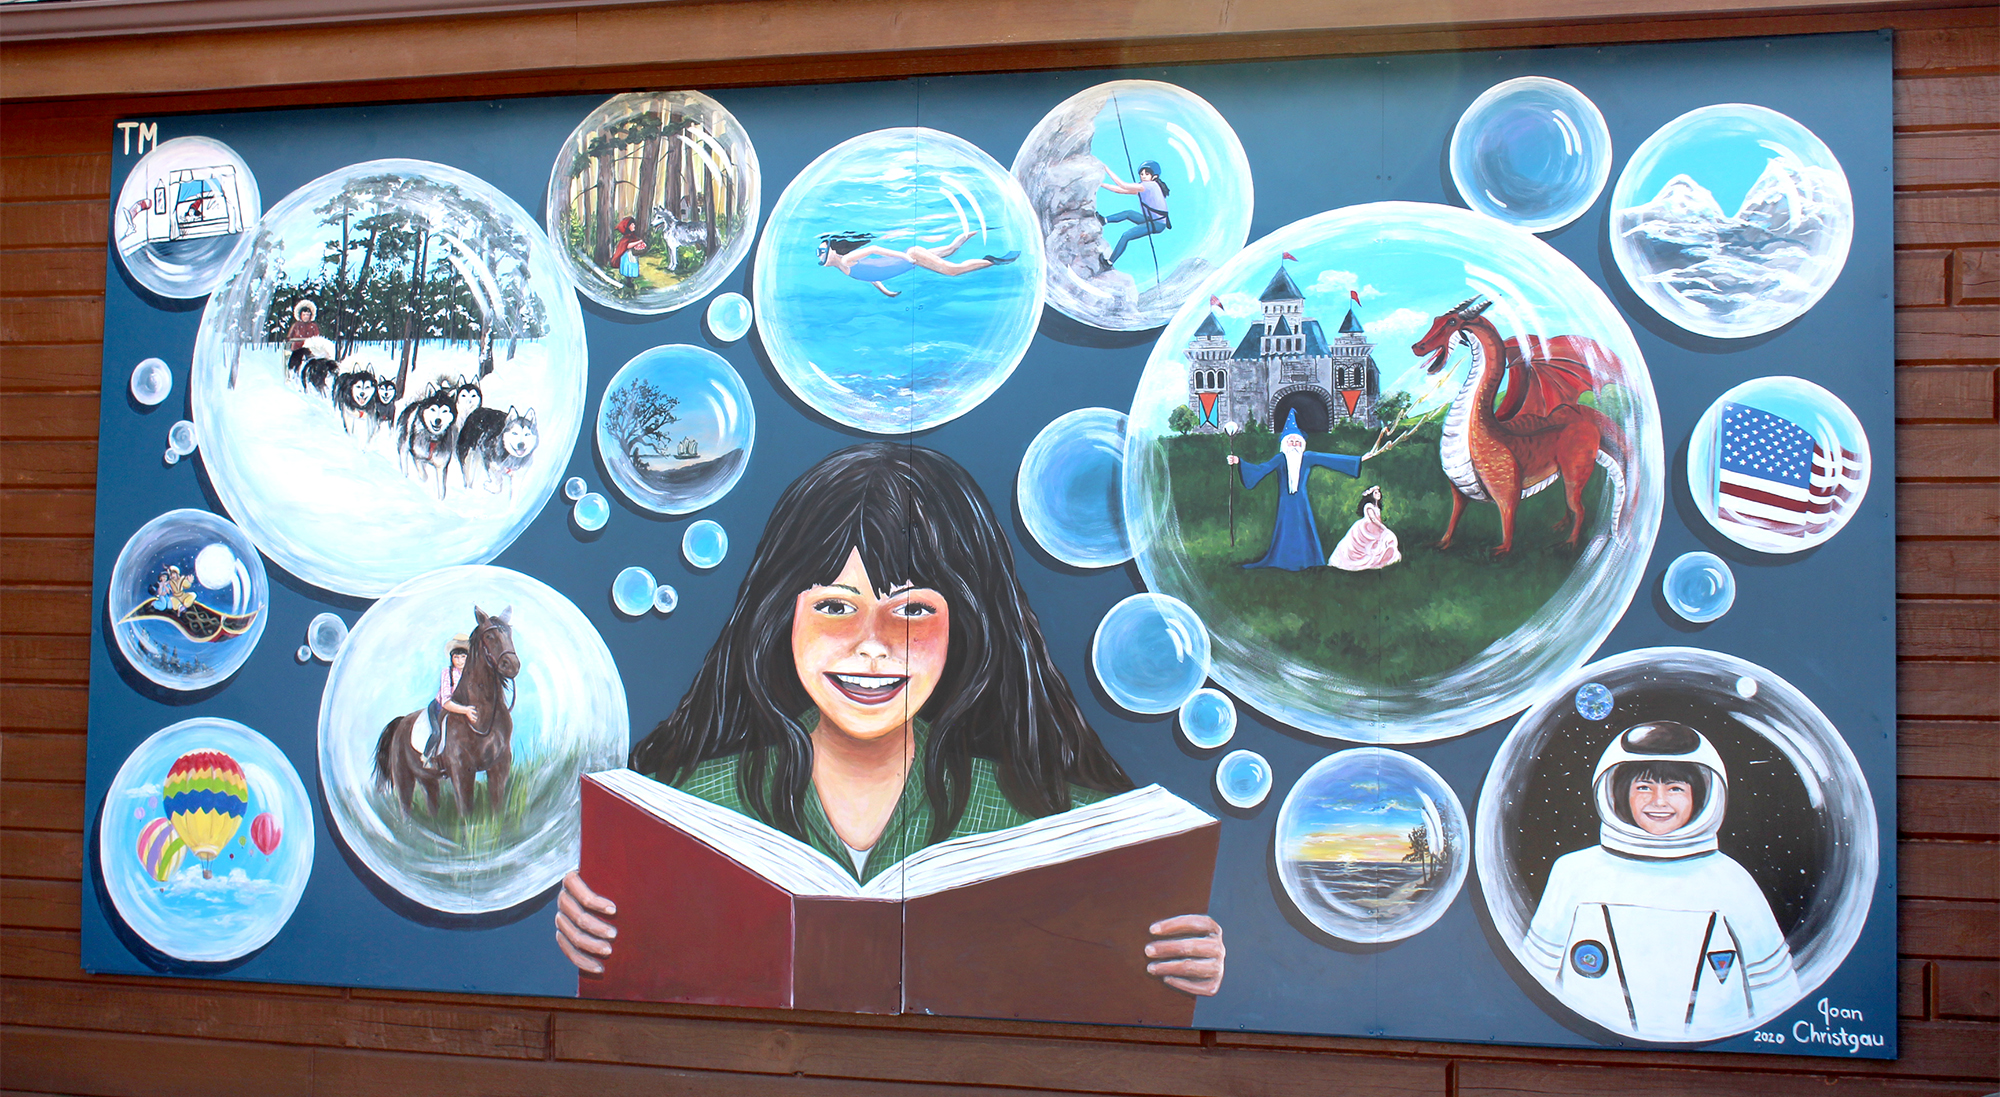 The Land O' Lakes Public Art Committee in collaboration with the Land O' Lakes Library Board would like to announce the new mural located on the west side of the library building, 4242 CTH B.